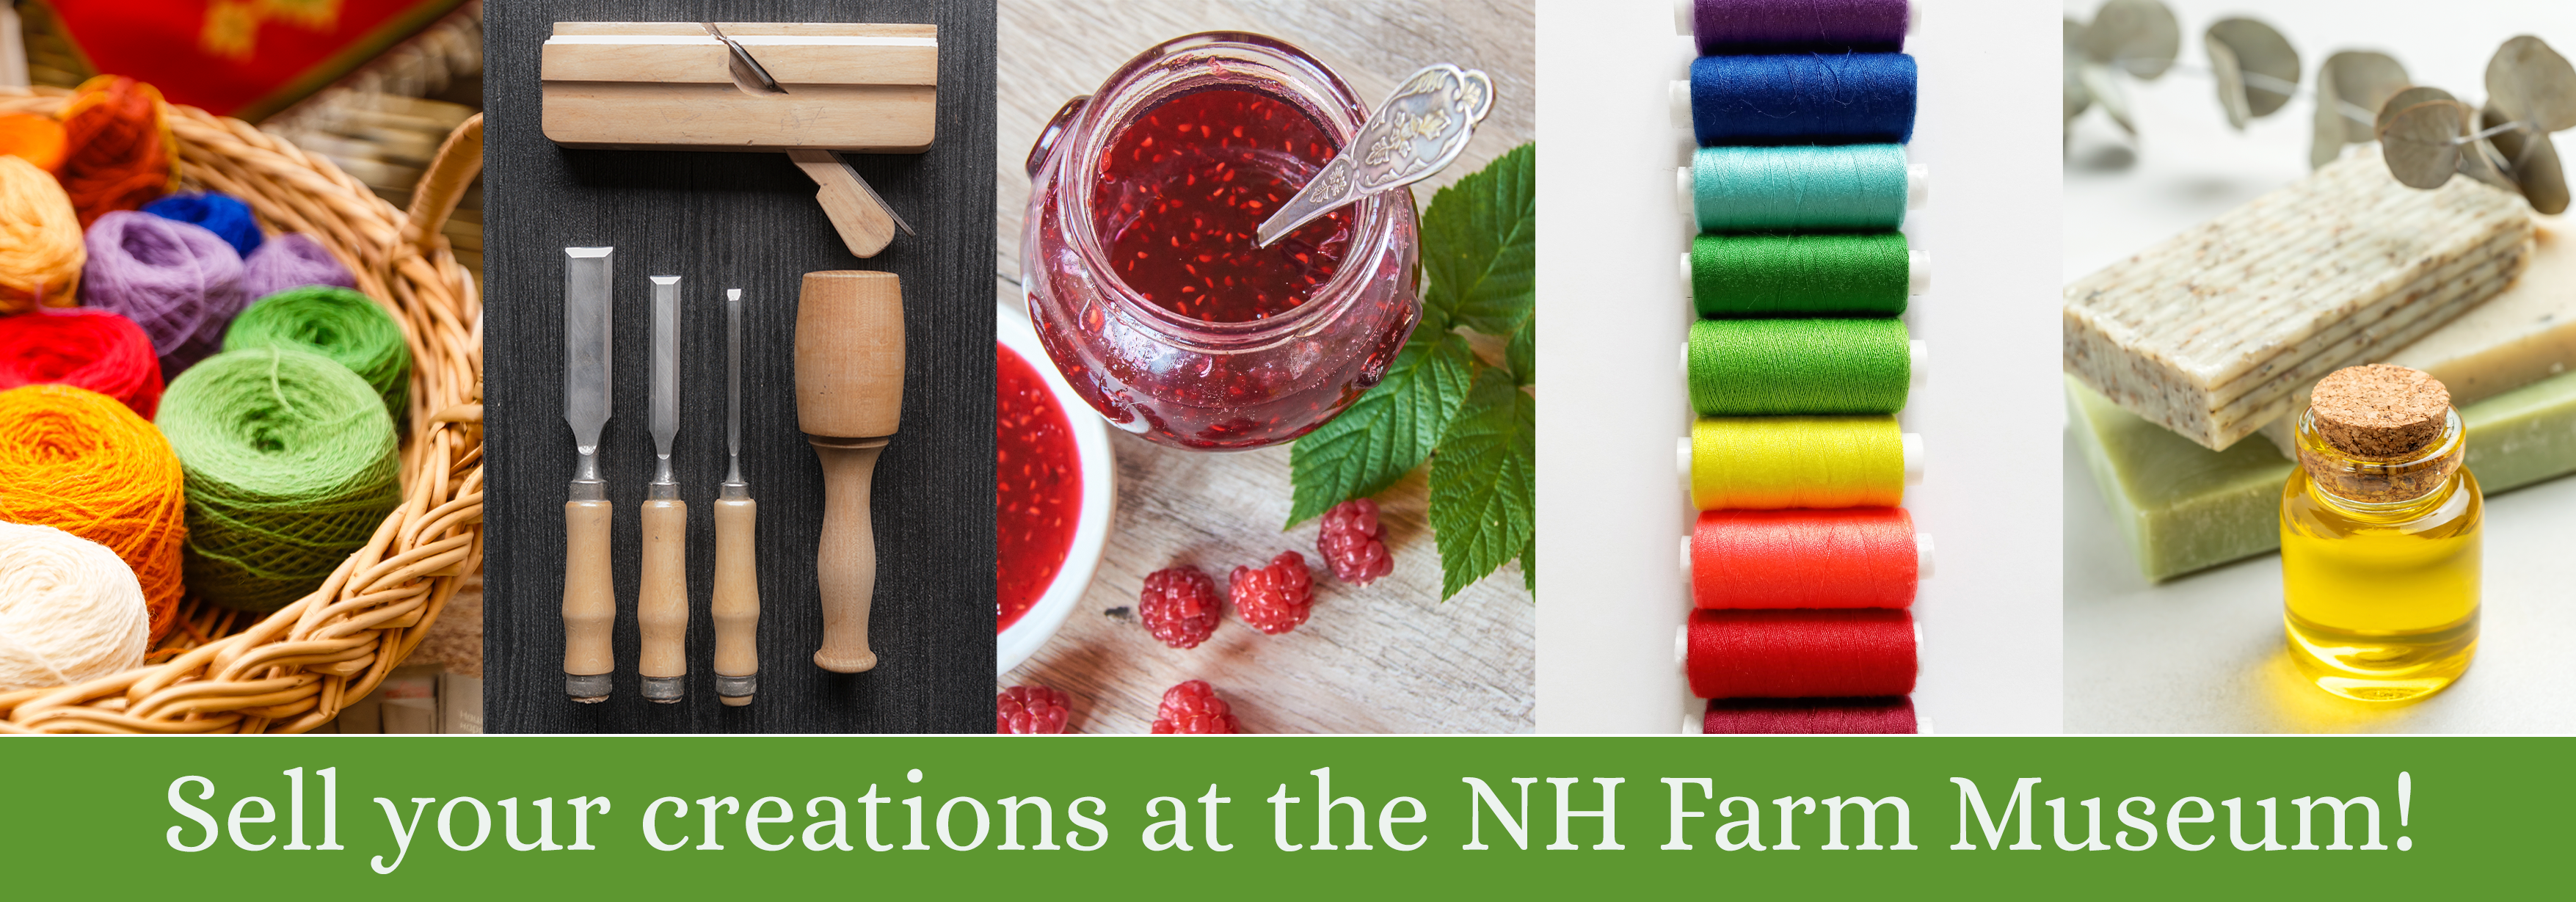 Sell your items at the NH Farm Museum